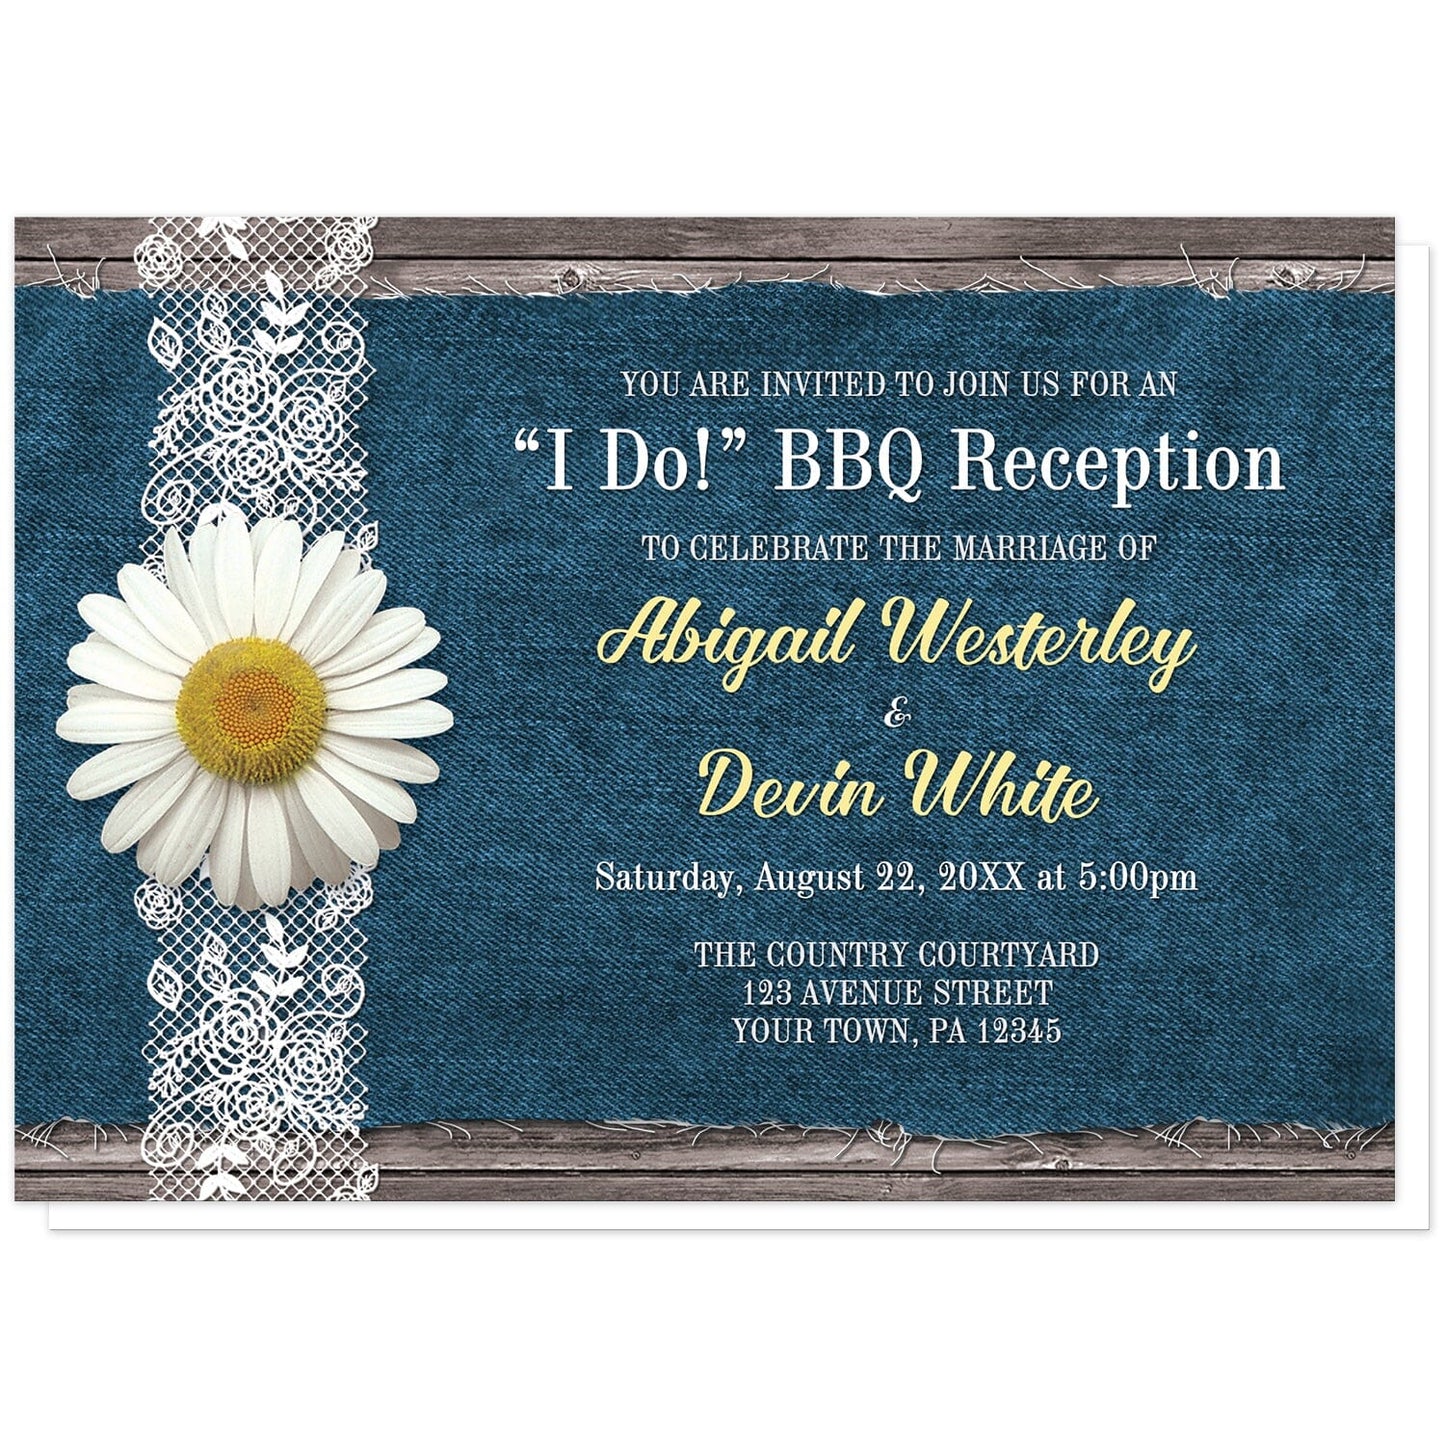 Daisy Denim and Lace I Do BBQ Reception Only Invitations at Artistically Invited. Invites with a white daisy flower on a white lace ribbon along the left side. Your personalized post-wedding reception celebration details are custom printed in white, light gray, and yellow over a fraying blue denim fabric background illustration over rustic wood. This design is great for couples combining different popular themed elements including a daisy, rustic wood, and denim and lace.